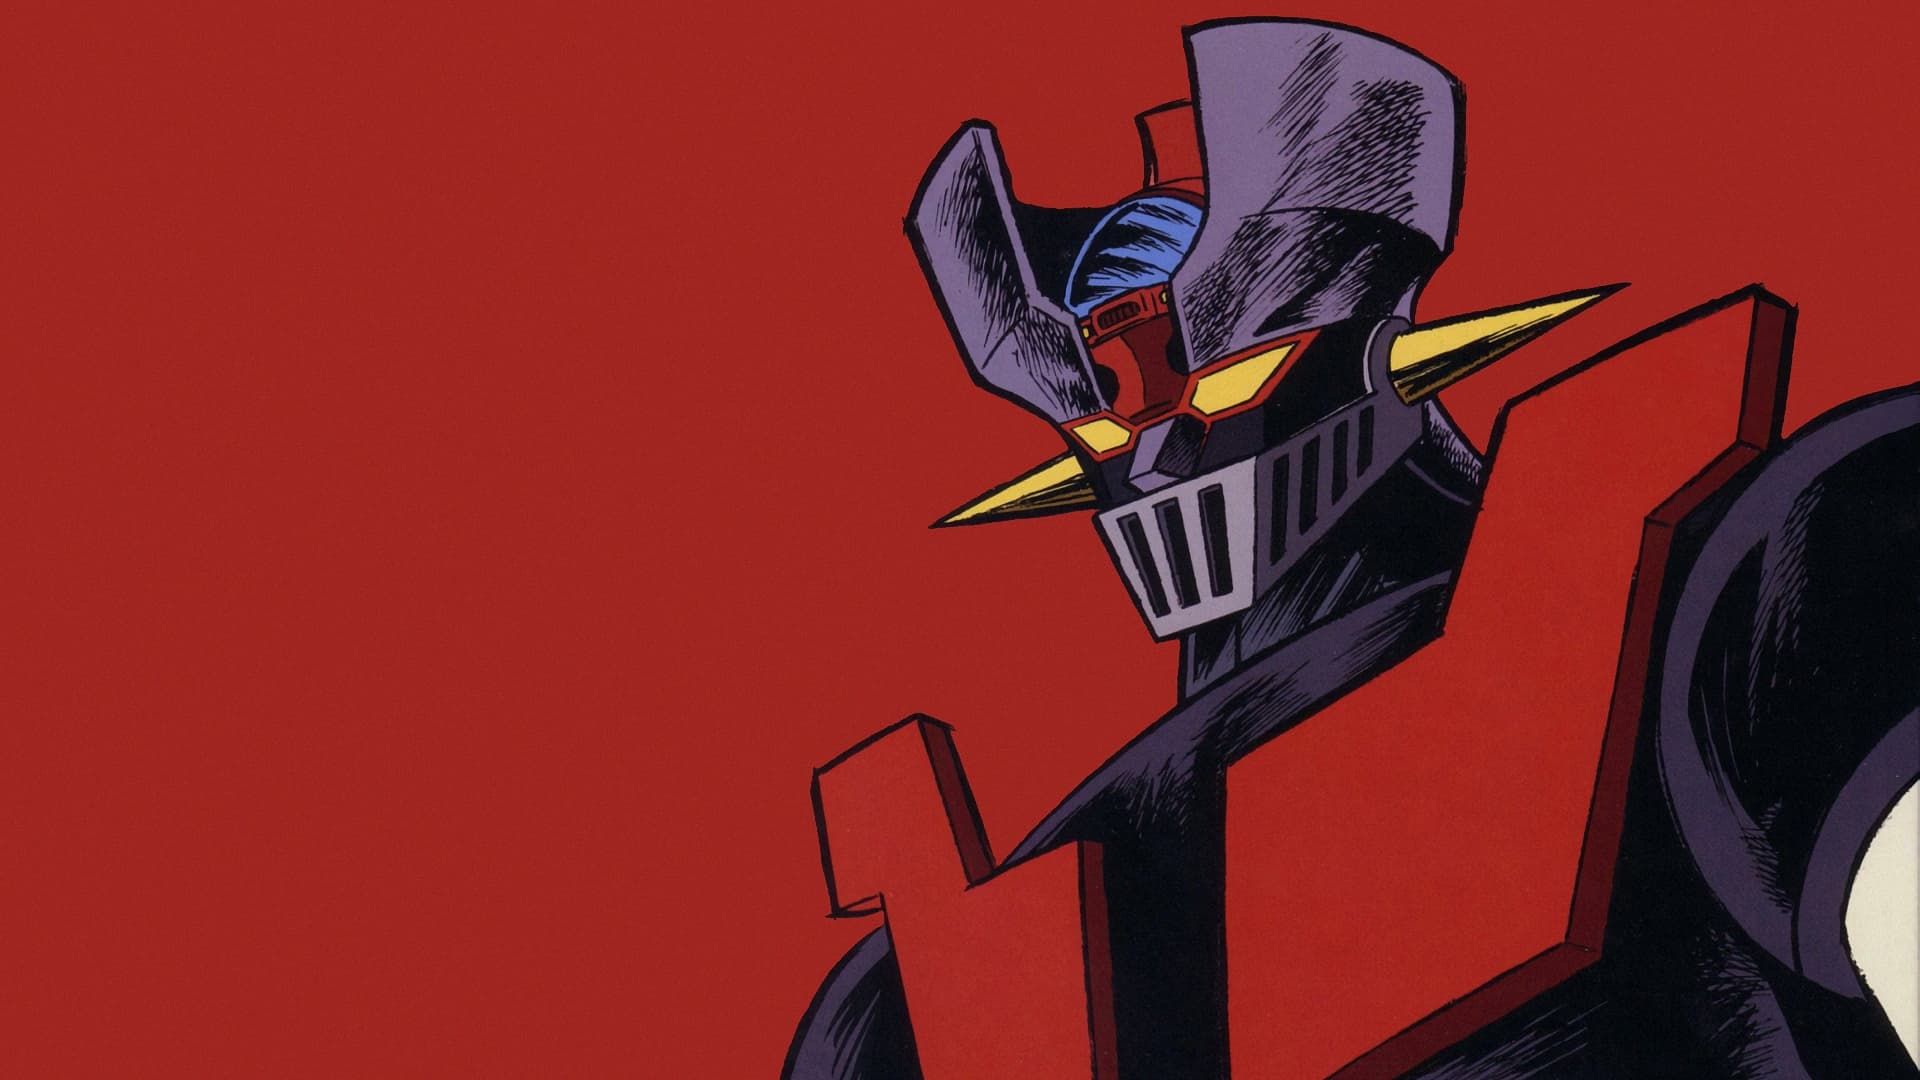 Mazinger Edition Z: The Impact! Backdrop